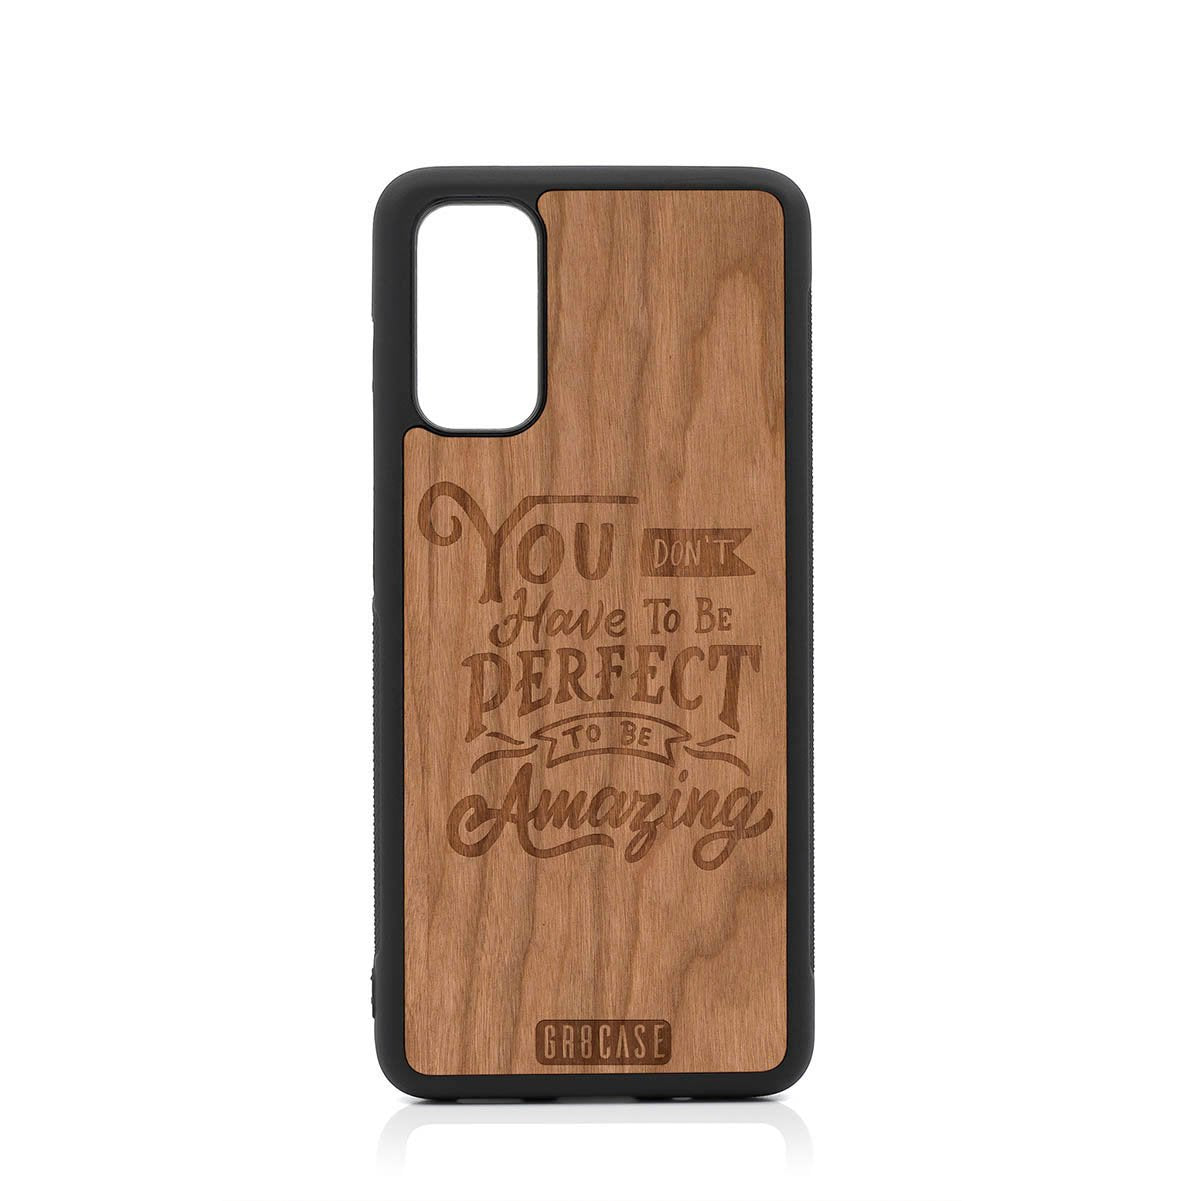 You Don't Have To Be Perfect To Be Amazing Design Wood Case For Samsung Galaxy S20 FE 5G